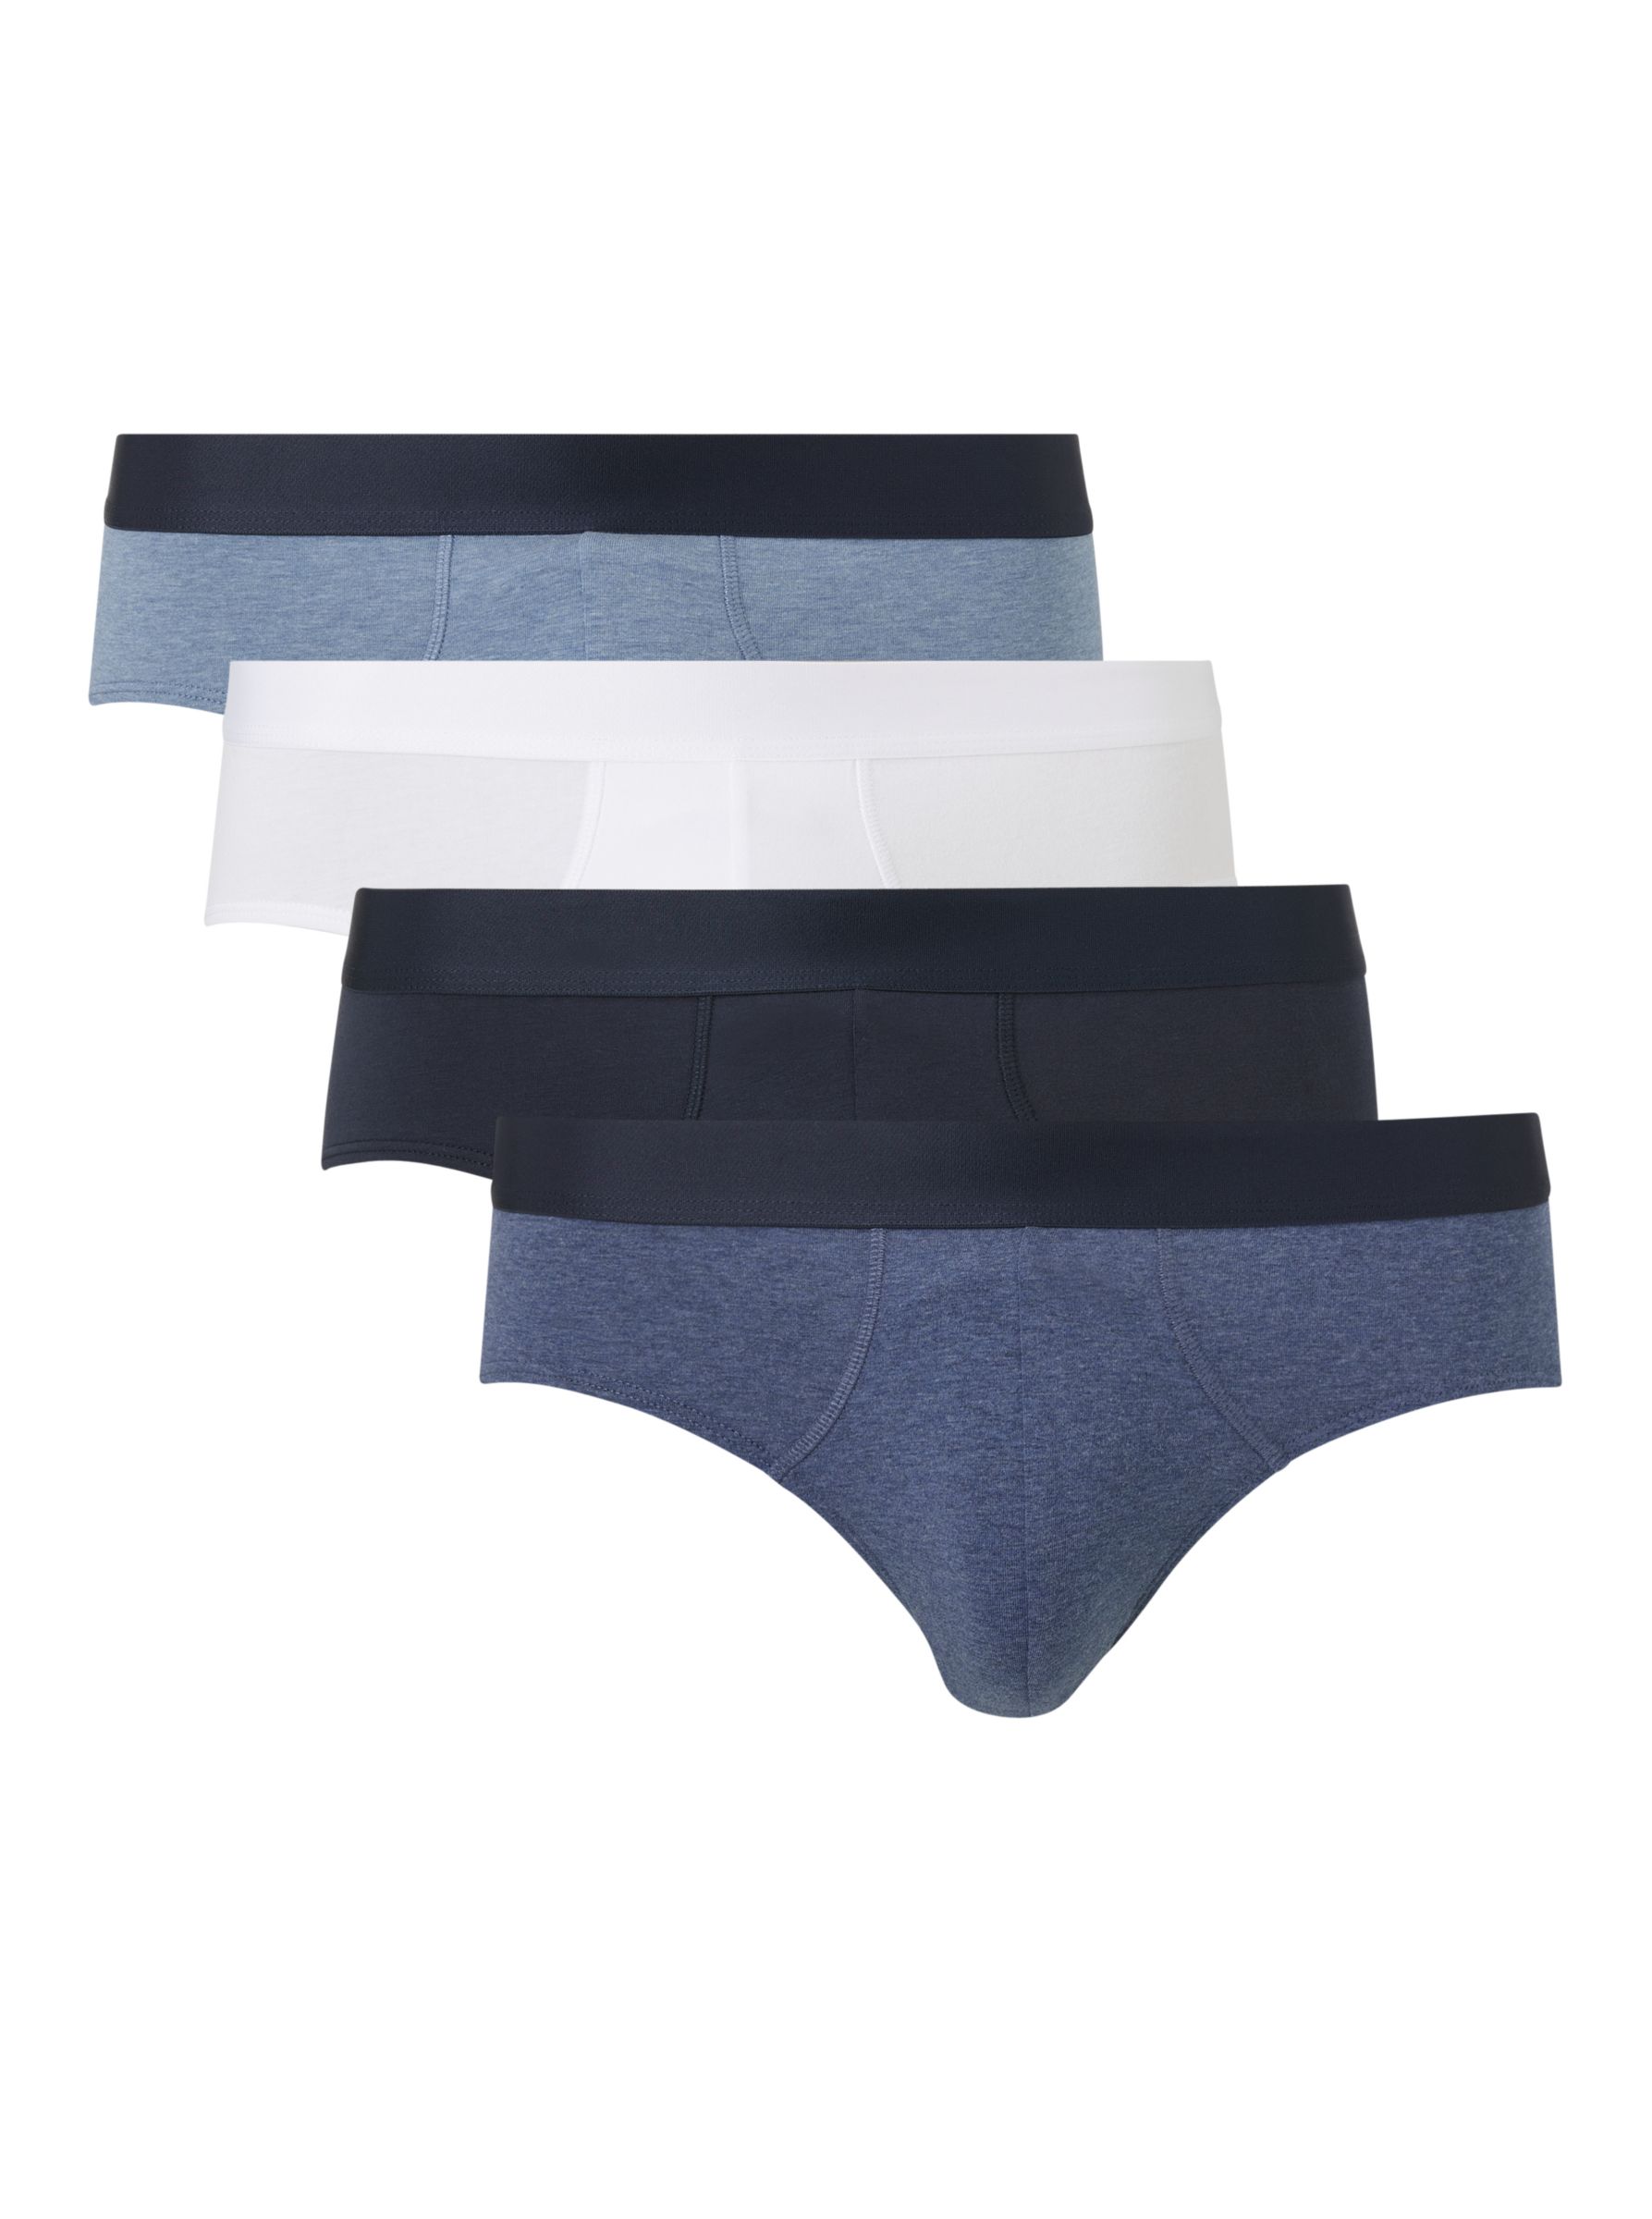 John Lewis ANYDAY Stretch Cotton Briefs, Pack of 4, Blue/Black